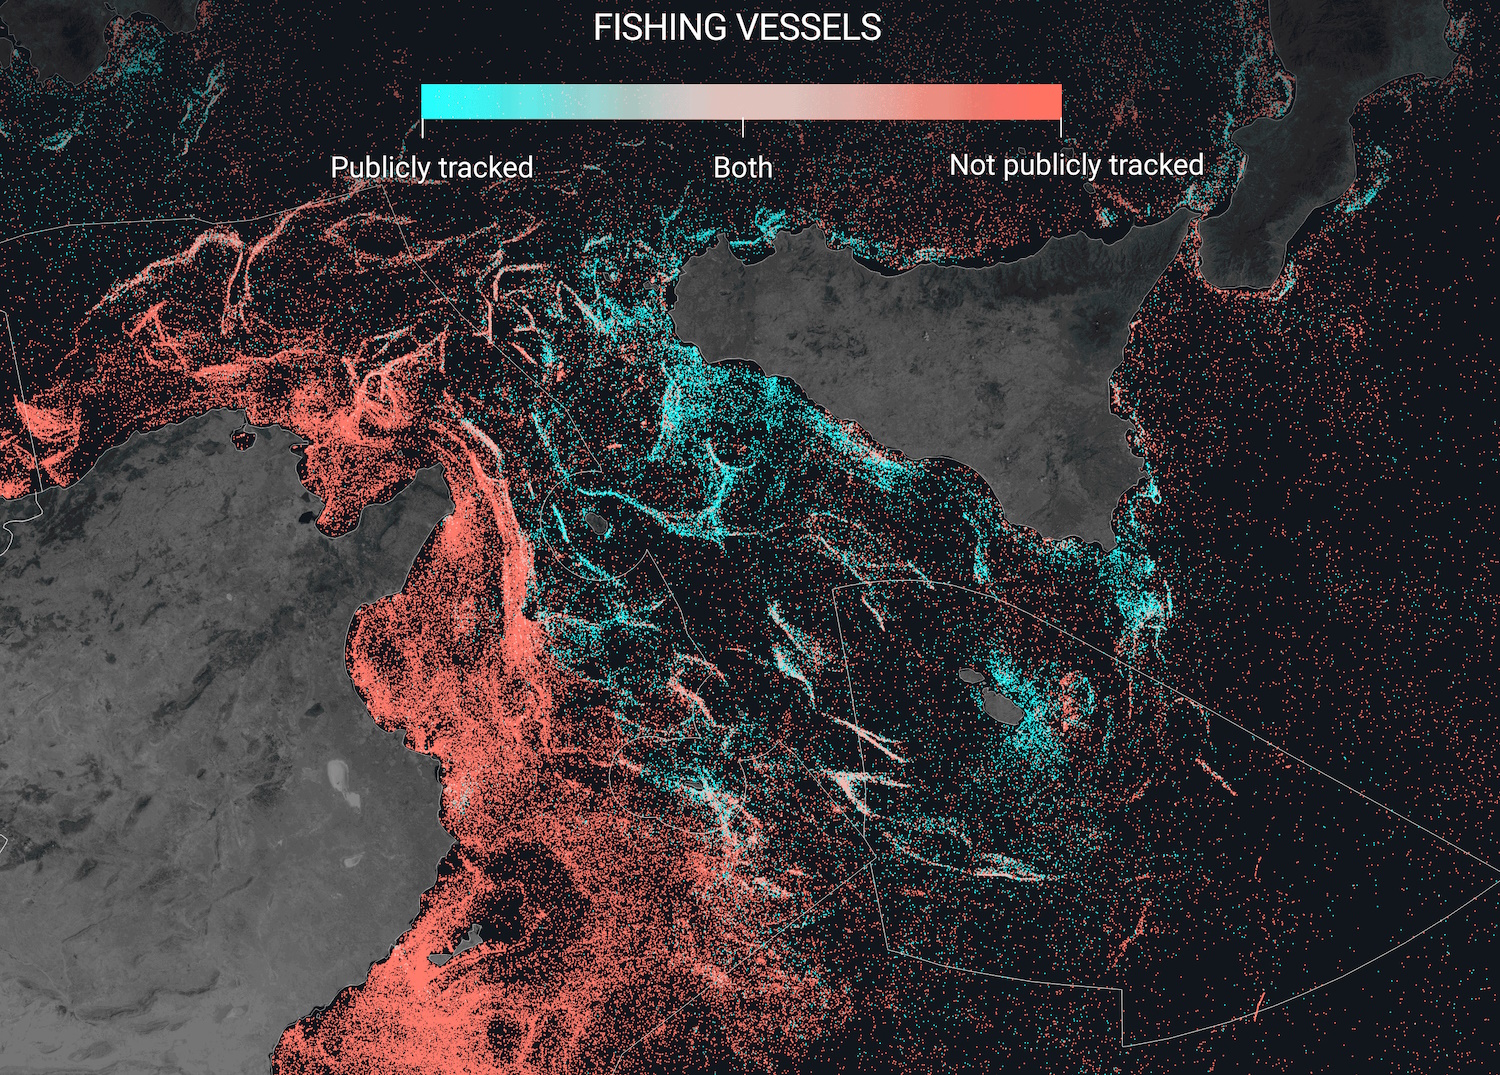 Satellite imagery analysis shows immense scale of dark fishing industry